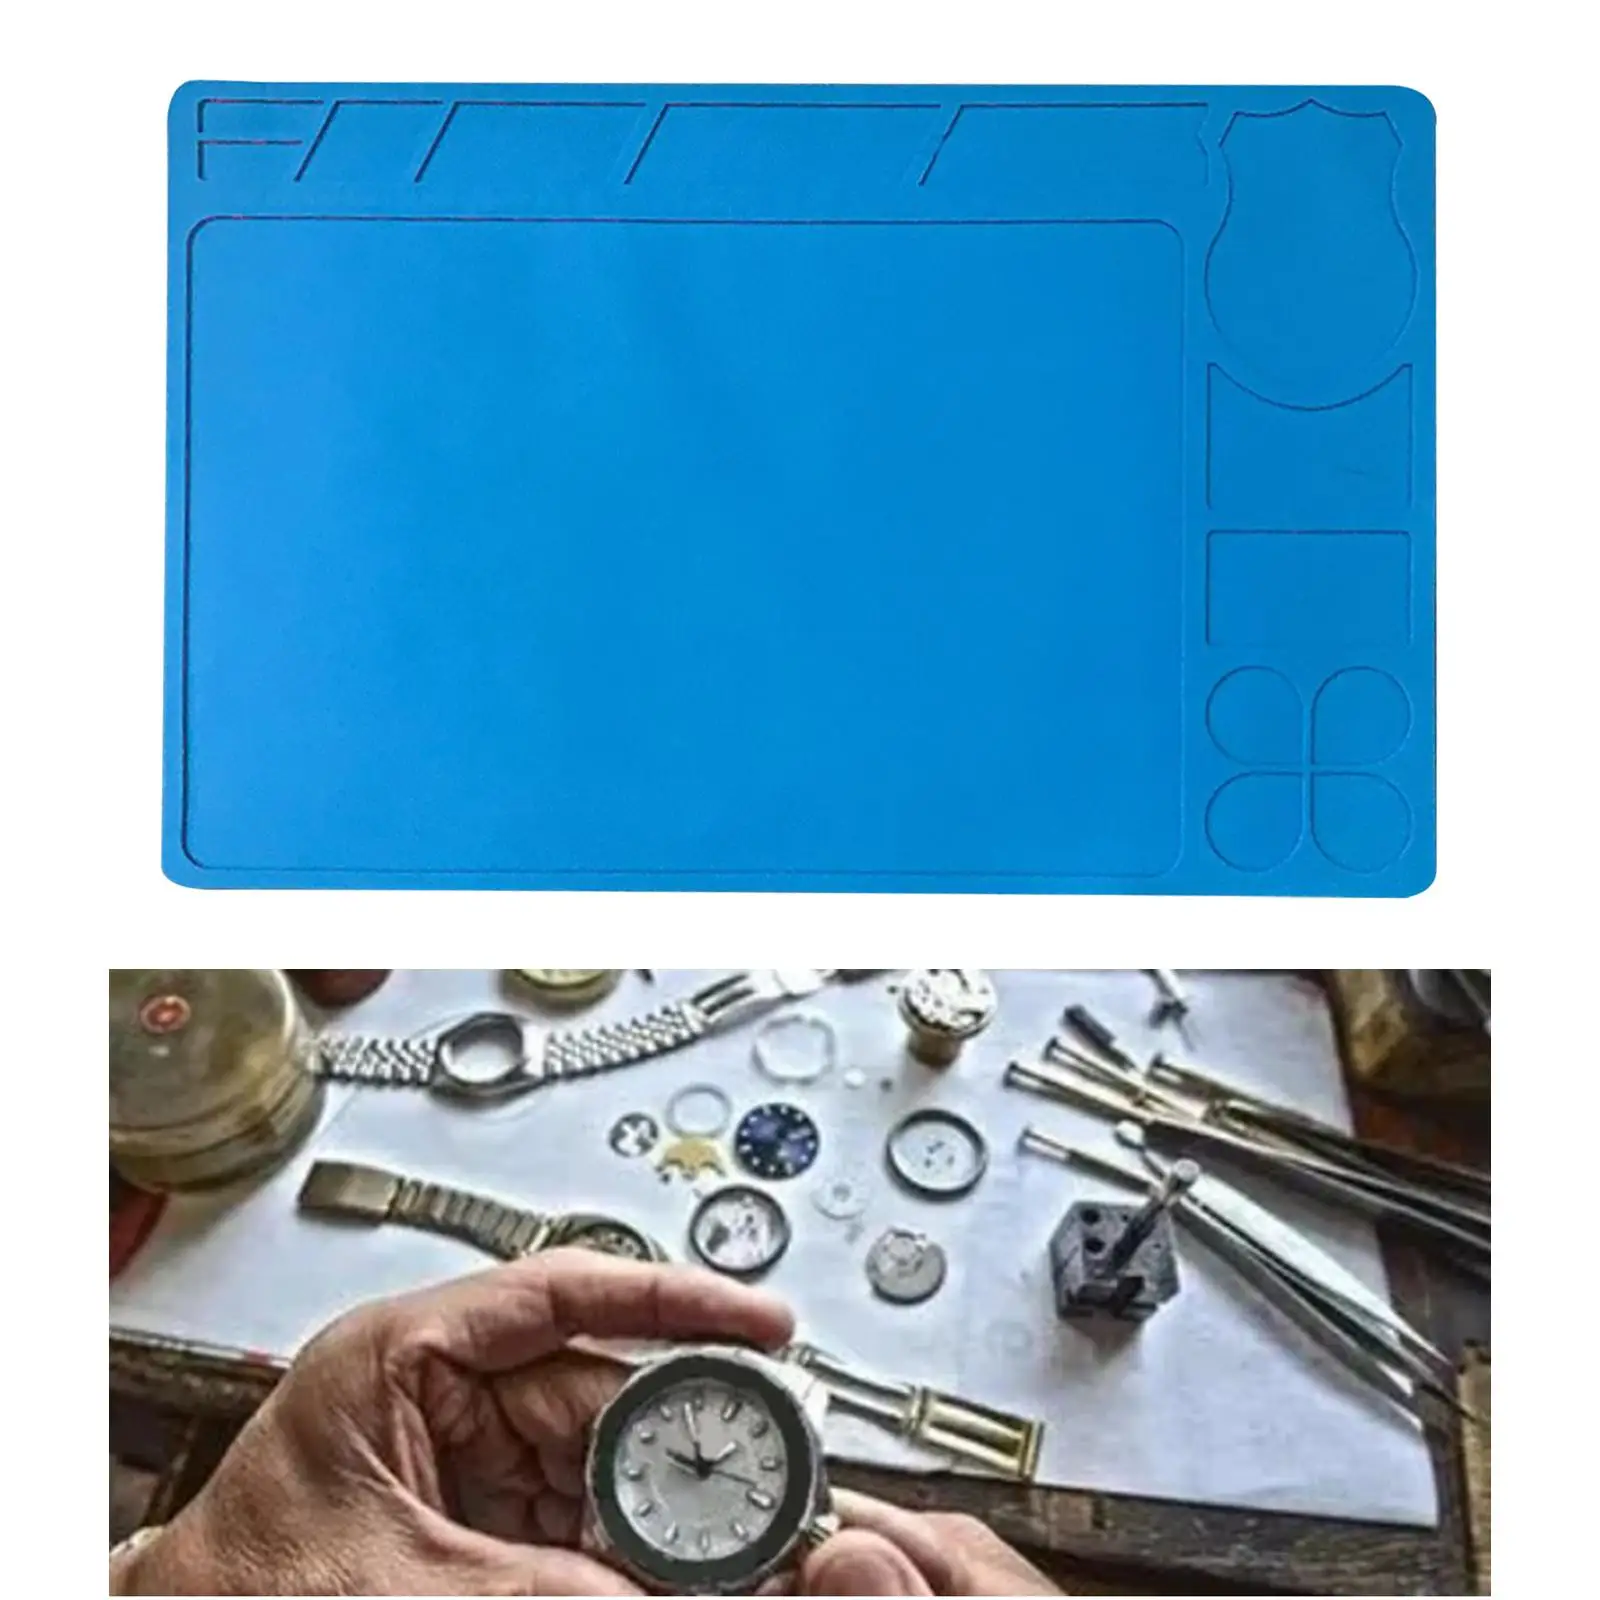 Heat Insulation Silicone Repair Mat with Scale Ruler and Screw Position